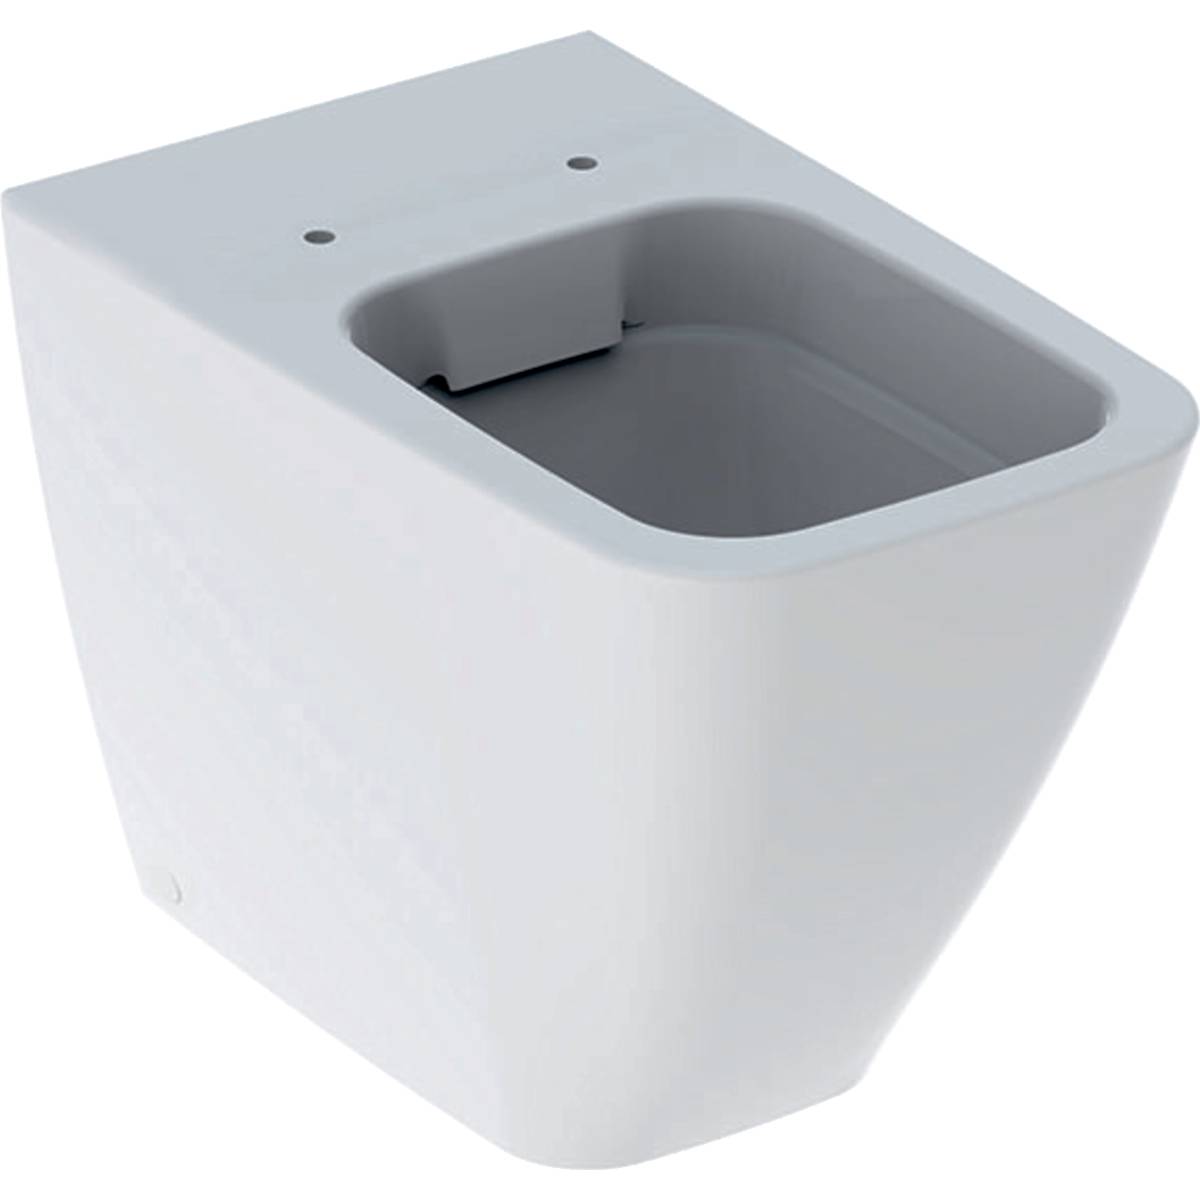 iCon Square Floor-Standing WC, Washdown, Back-To-Wall, Shrouded, Rimfree